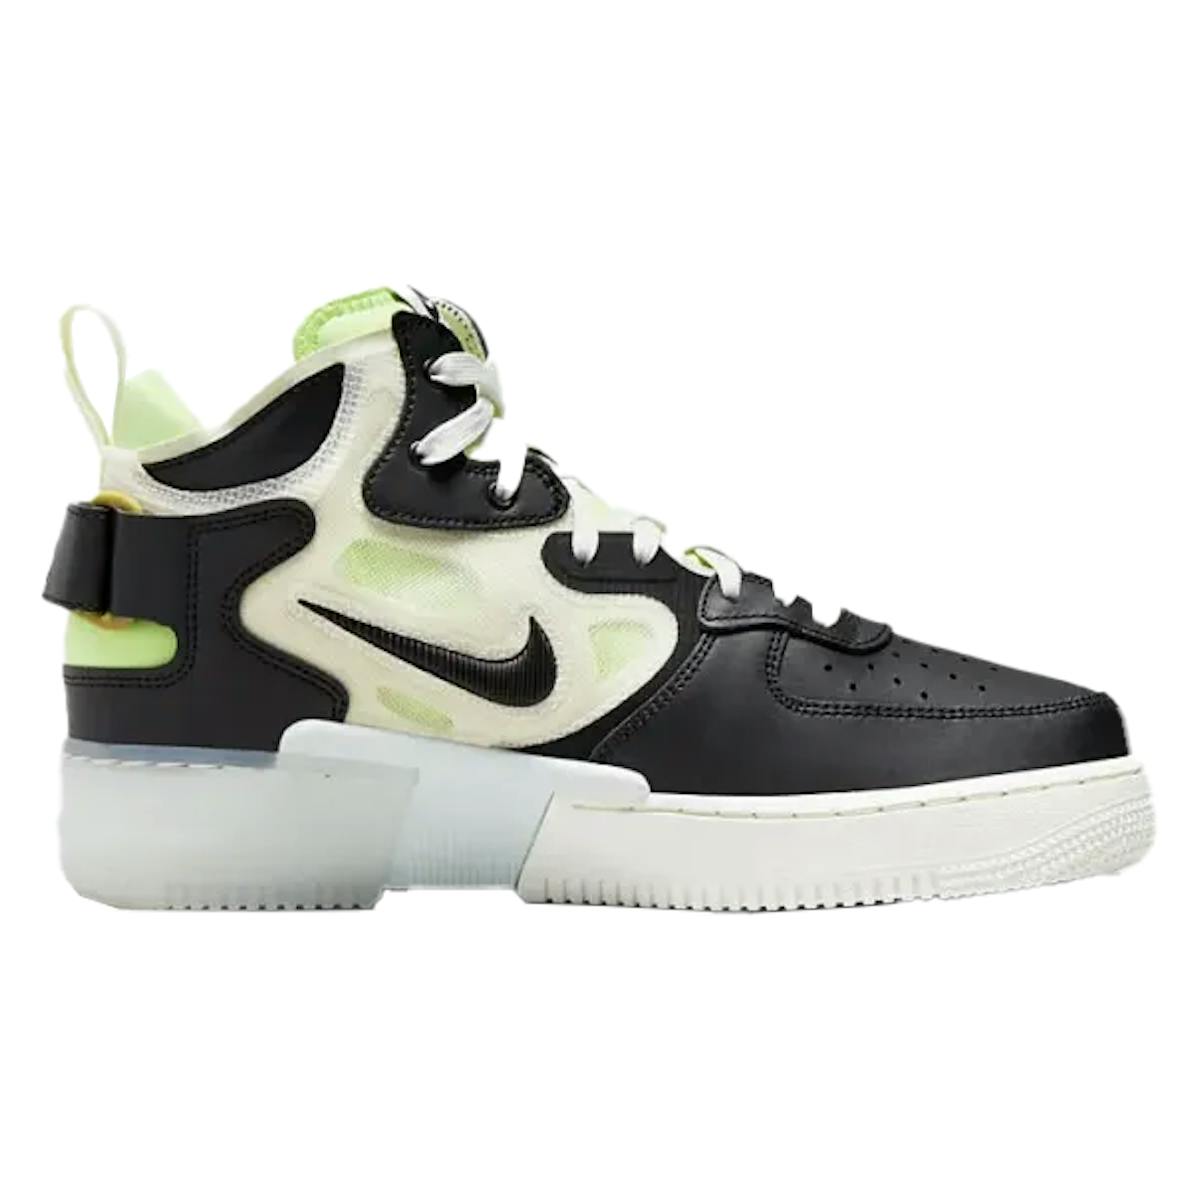 Nike Air Force 1 Mid React "Neon Green"